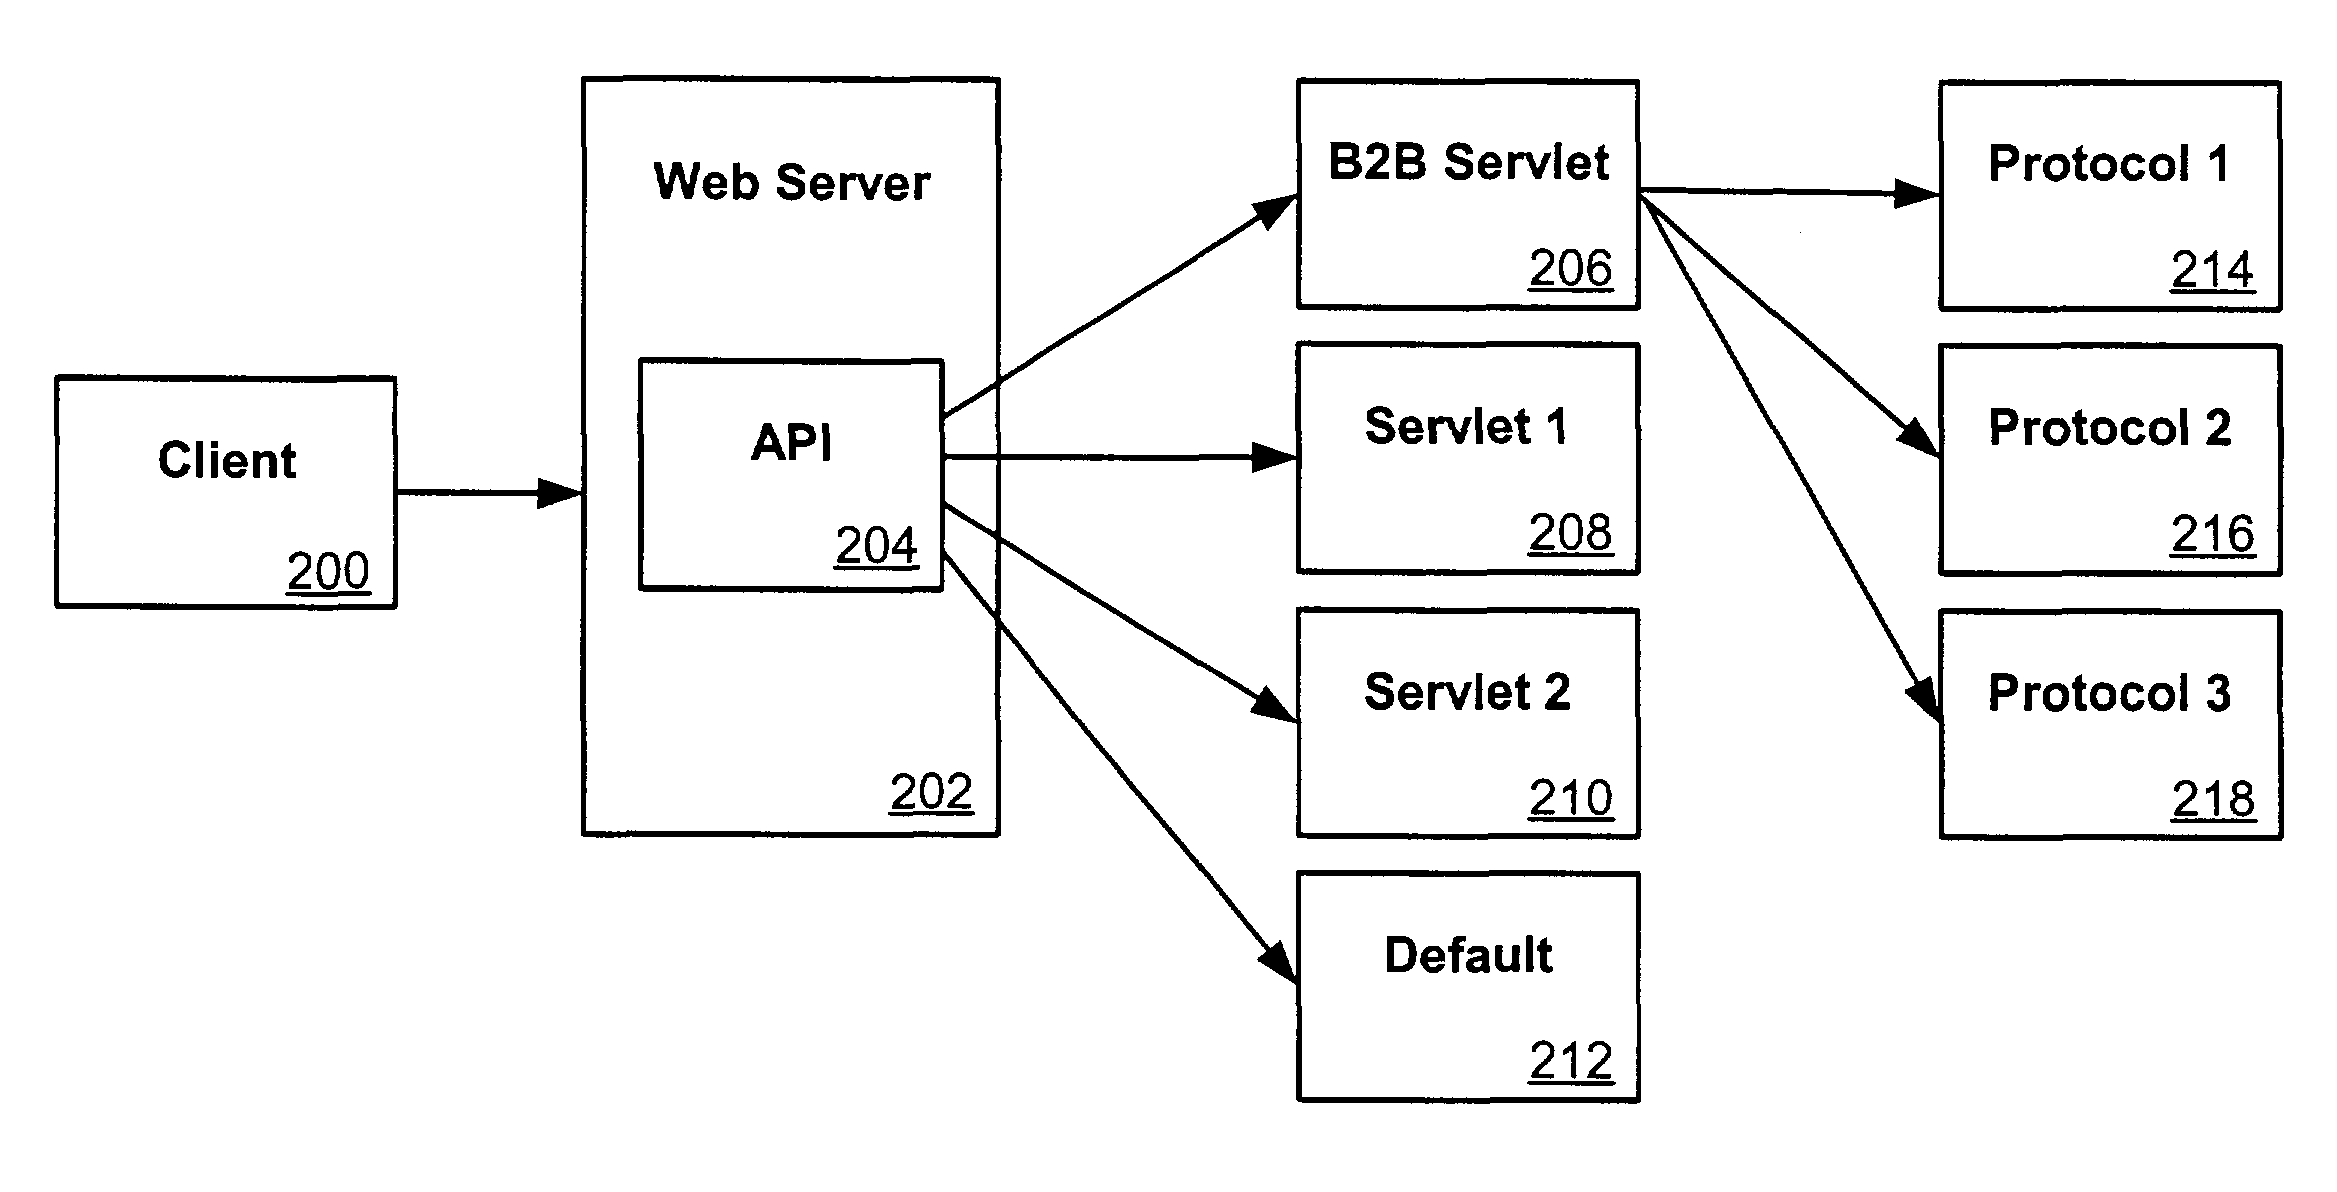 Single servlets for B2B message routing